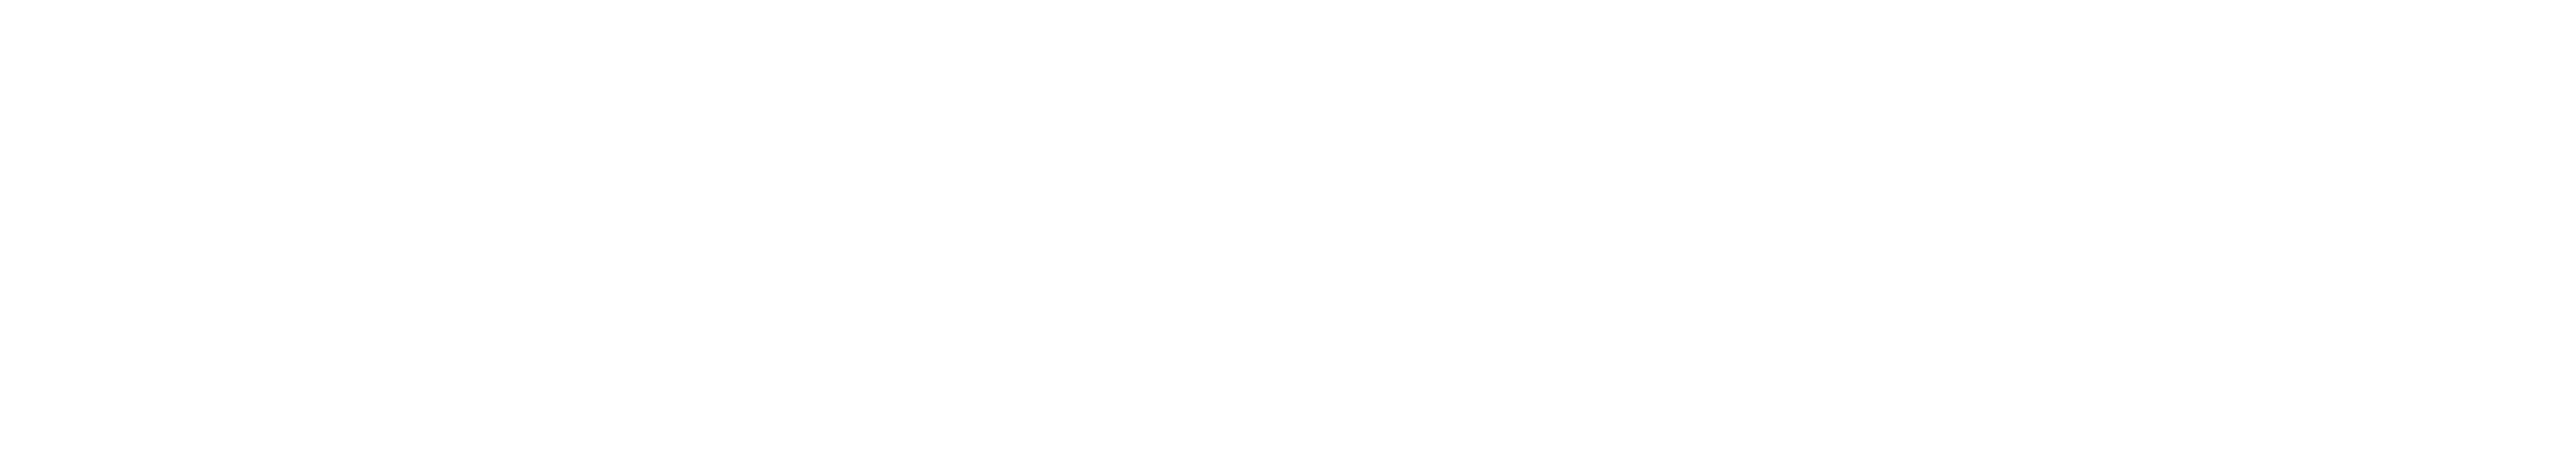 The School of Hospitality Business - Michigan State University